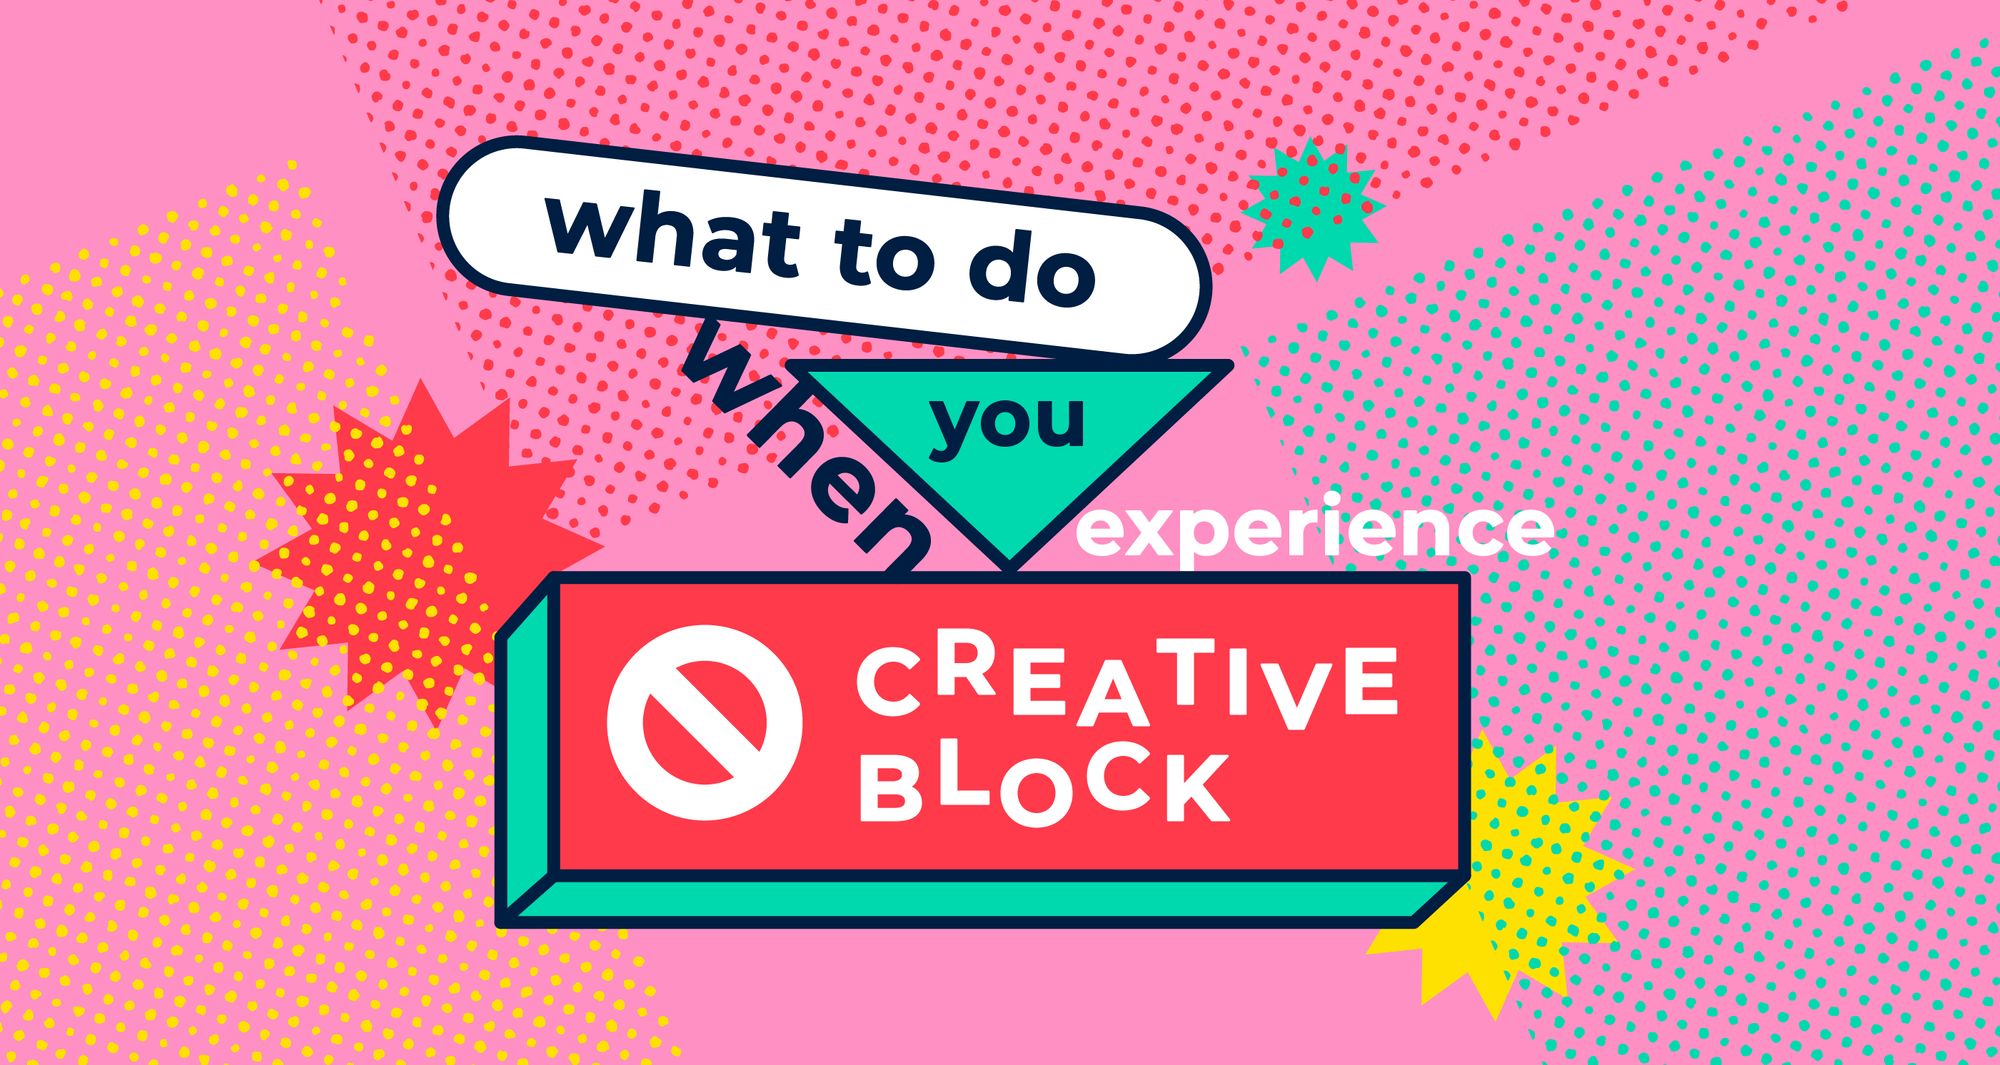 What to do when you experience creative block